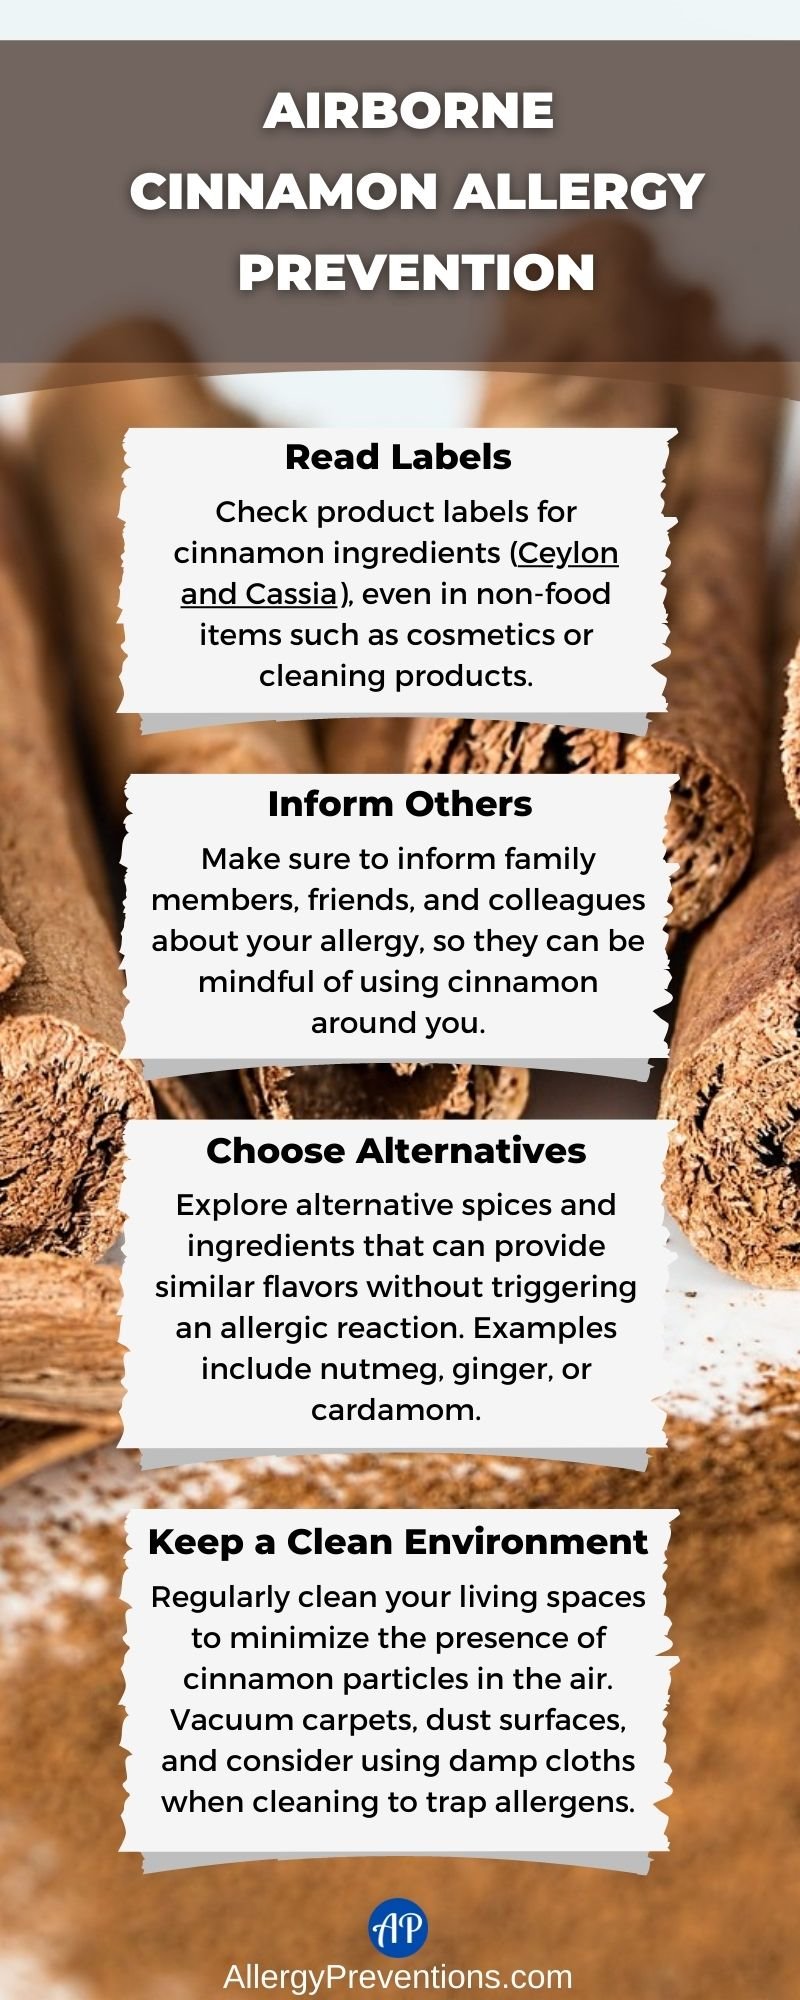 Airborne cinnamon allergy prevention infographic: Read labels, inform others, choose alternatives, keep a clean environment.